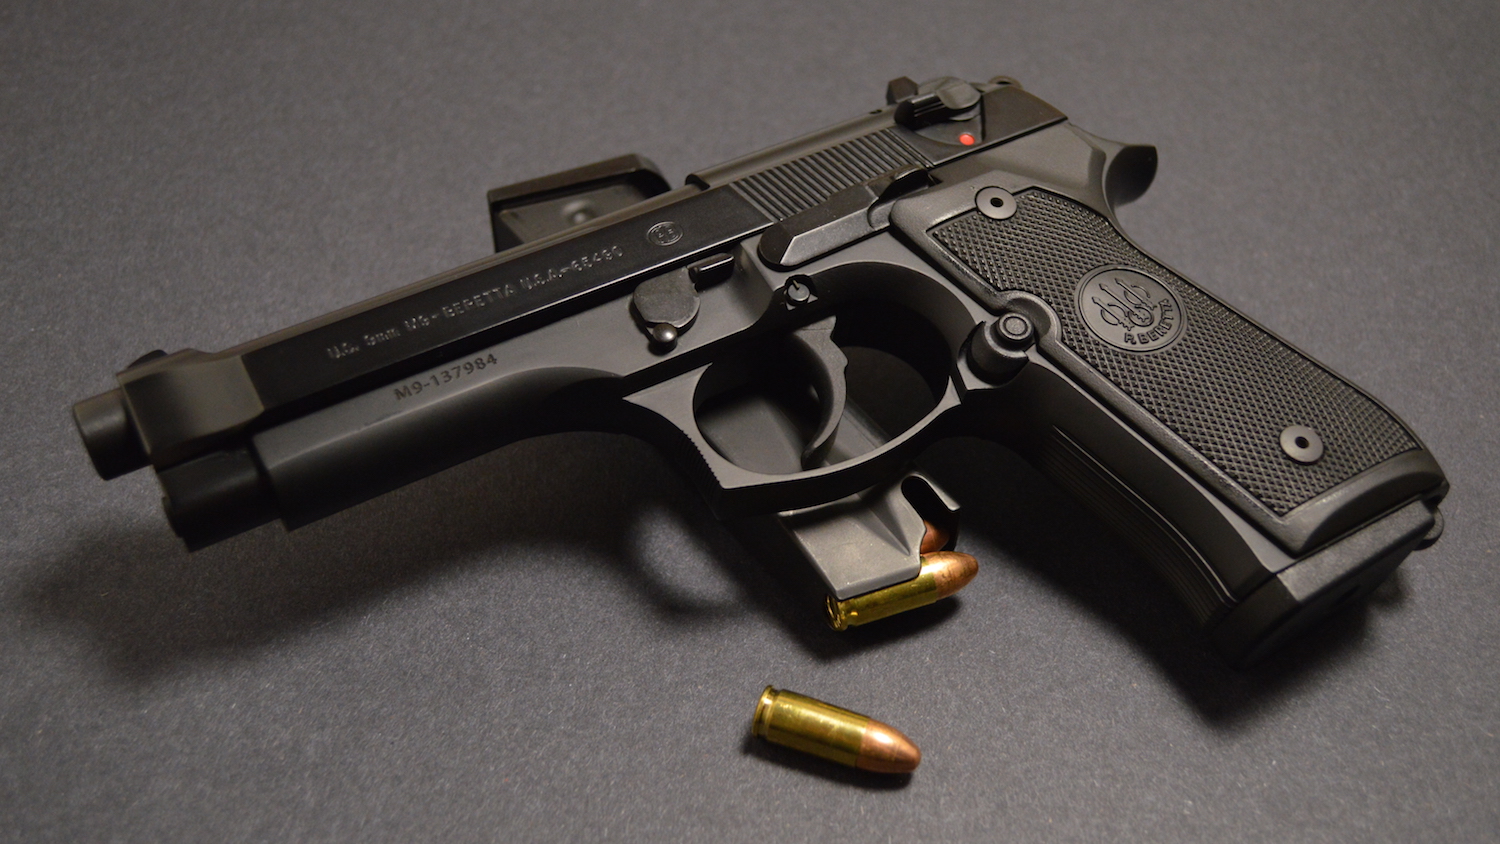 Remembering How the Beretta M9 Became America’s Sidearm